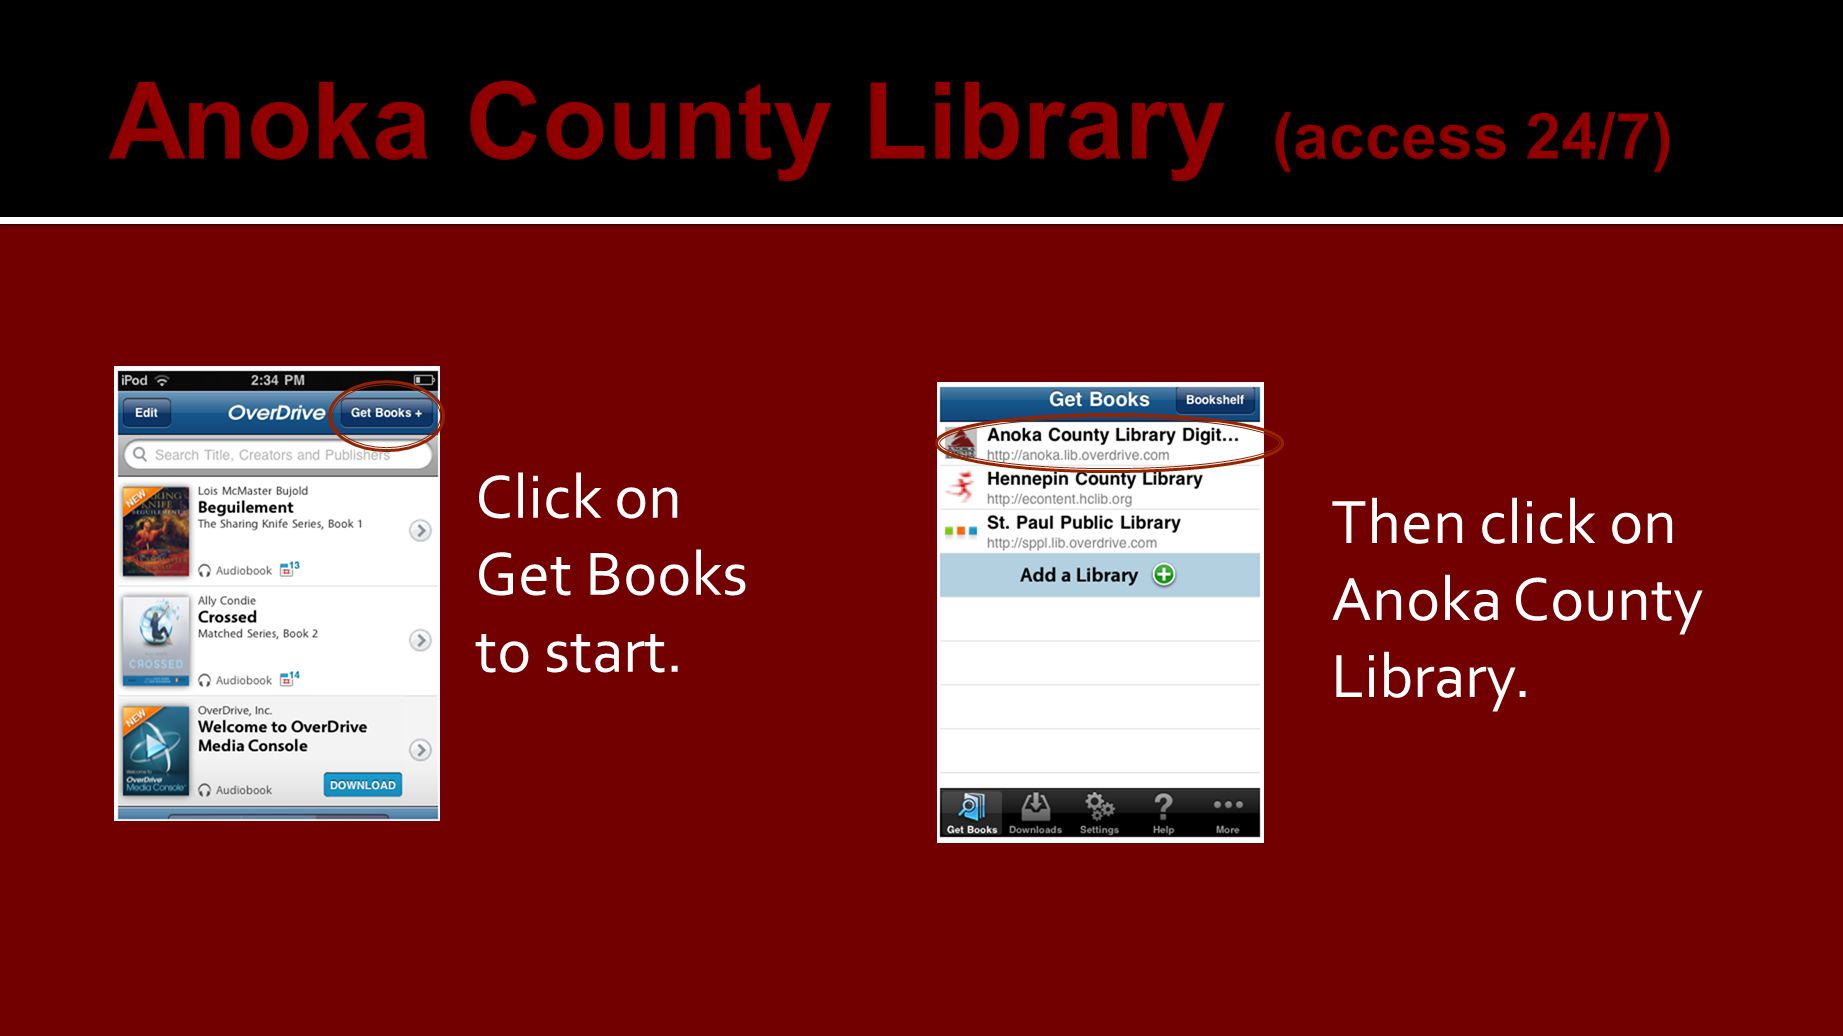 Click on Get Books to start. Then click on Anoka County Library.